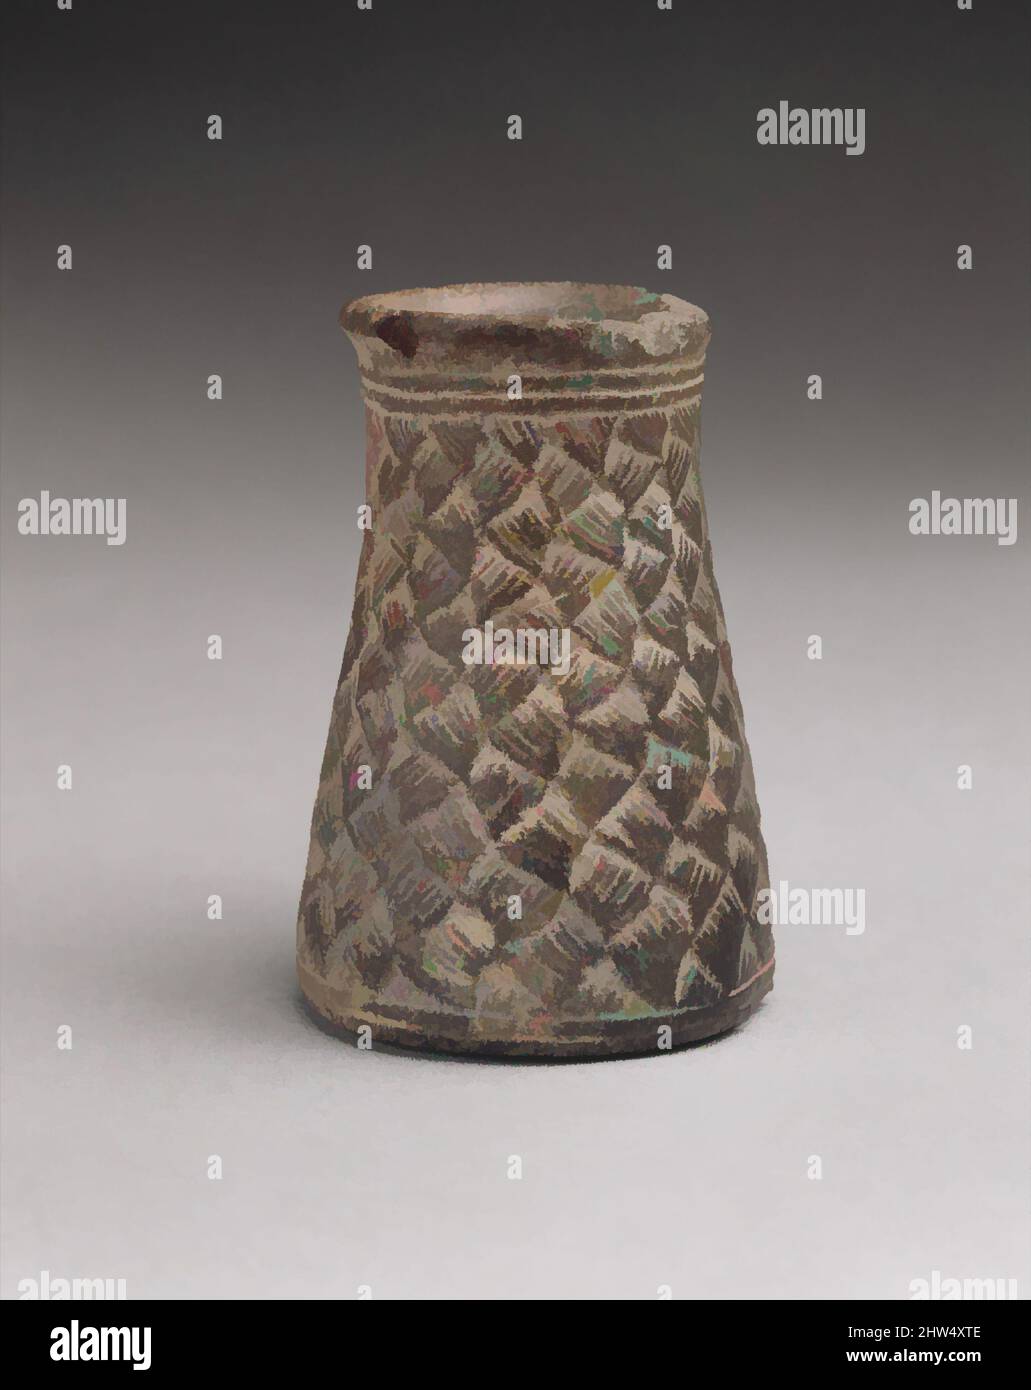 Art inspired by Vase with basket-weave pattern, Early Bronze Age, ca. mid- to late 3rd millennium B.C., Persian Gulf region or southern Iran, Chlorite, 2.95 in. (7.49 cm), Stone-Vessels, Classic works modernized by Artotop with a splash of modernity. Shapes, color and value, eye-catching visual impact on art. Emotions through freedom of artworks in a contemporary way. A timeless message pursuing a wildly creative new direction. Artists turning to the digital medium and creating the Artotop NFT Stock Photo